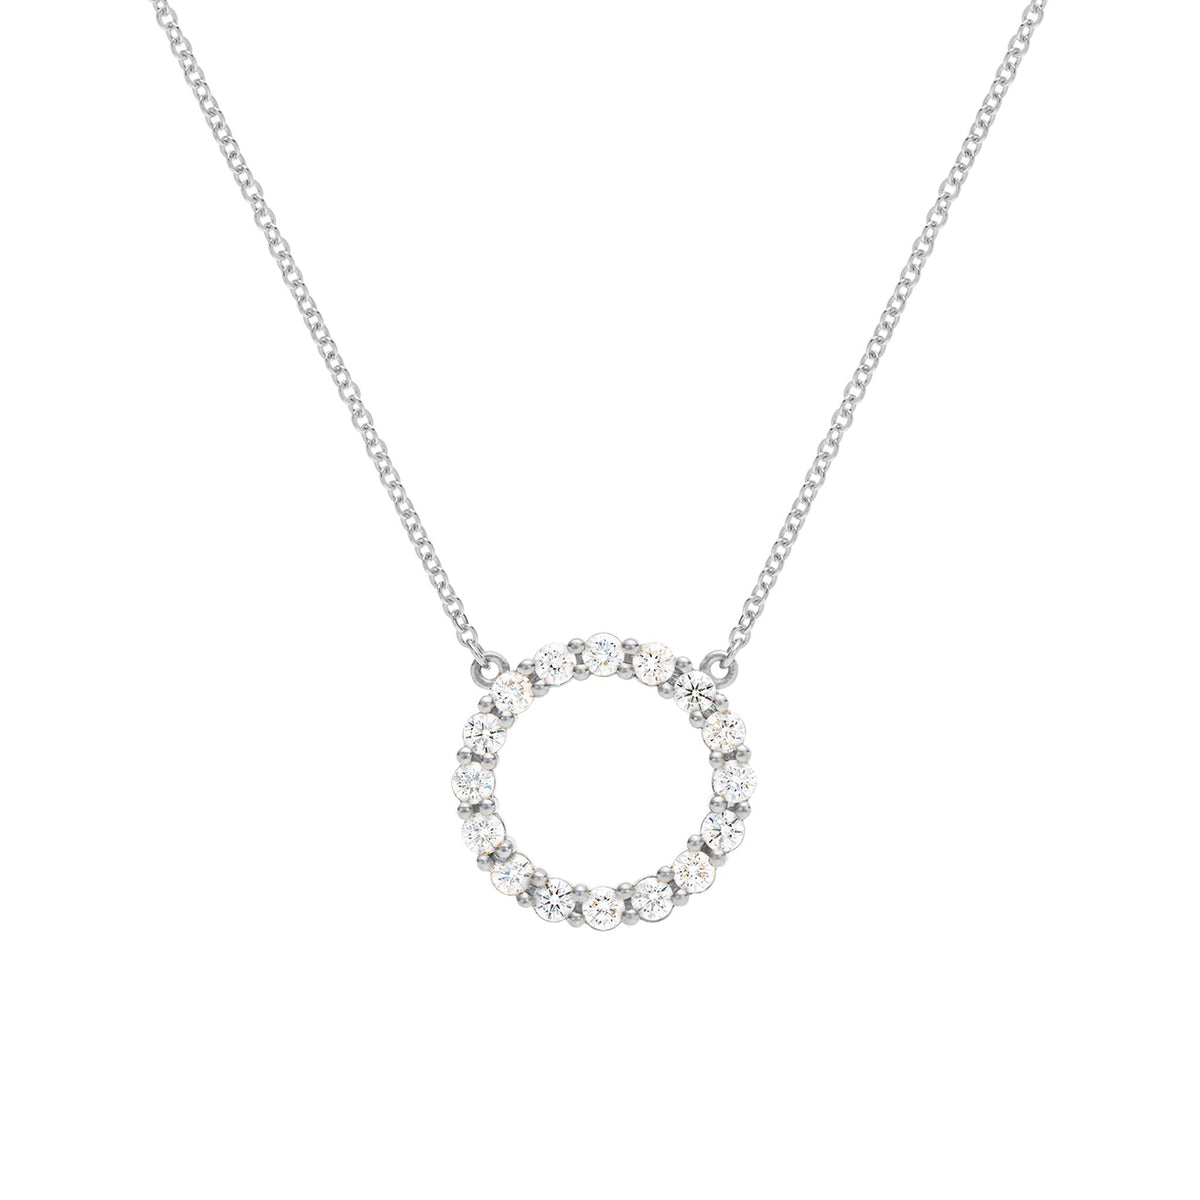 Lyric Necklace with Diamonds in 18K White Gold - Kwiat